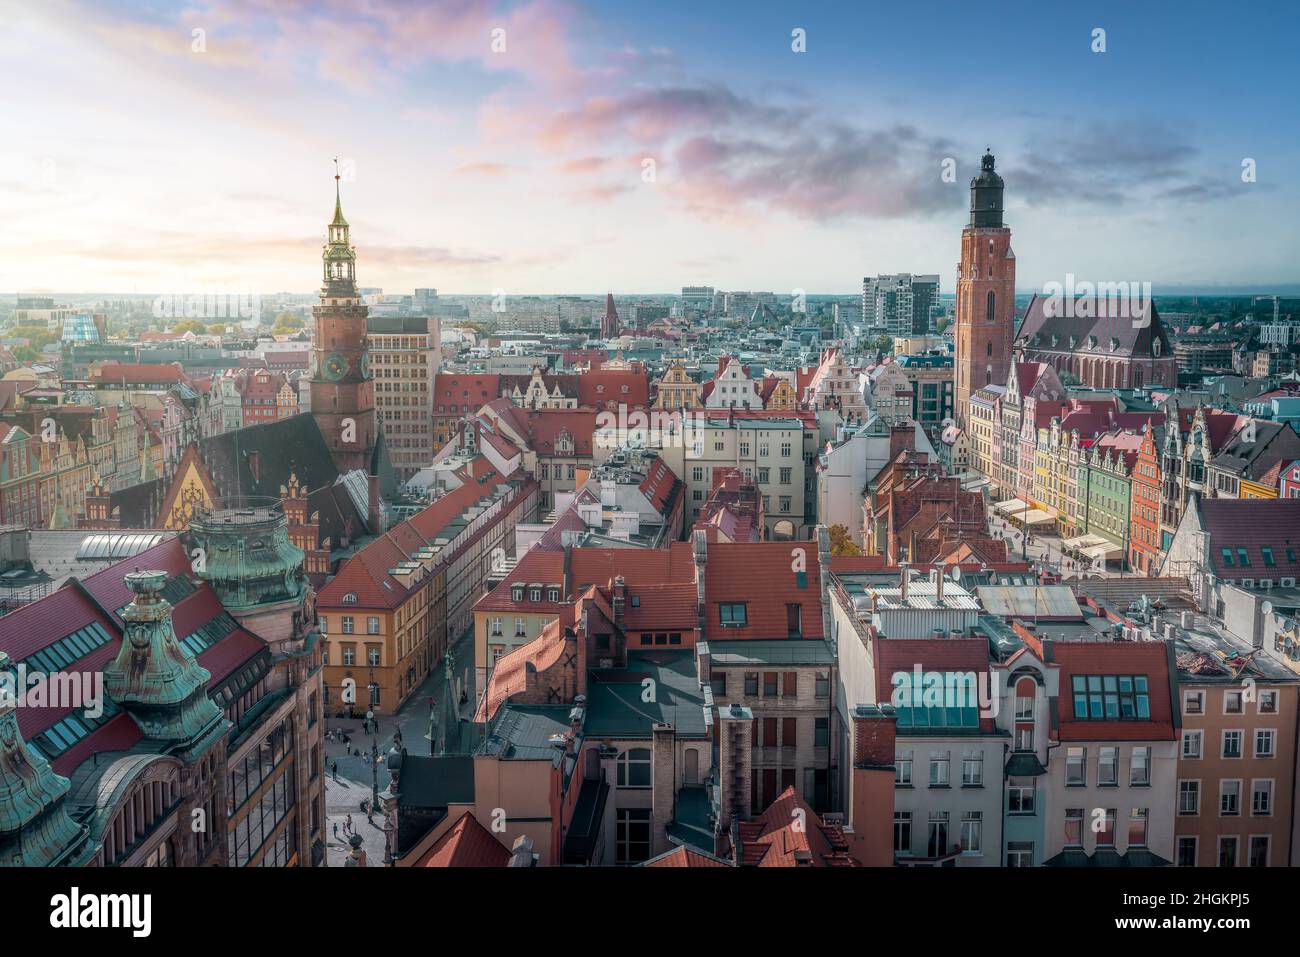 Wroclaw Skyline with Old Town Hall, St Elizabeth Church and Market Square at sunset - Wroclaw, Poland Stock Photo